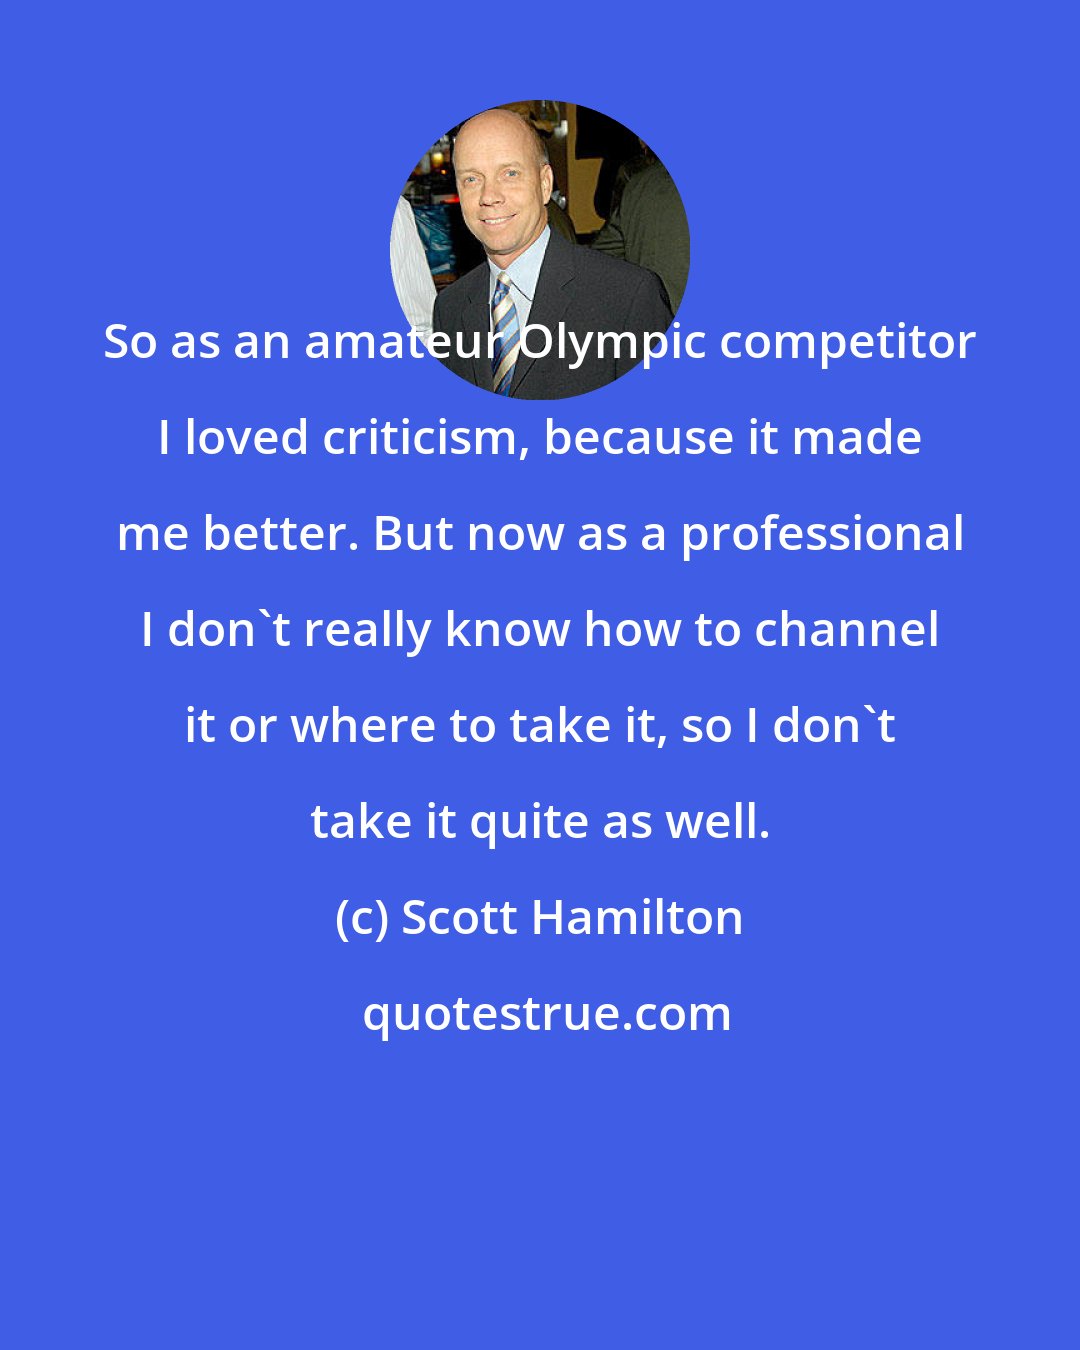 Scott Hamilton: So as an amateur Olympic competitor I loved criticism, because it made me better. But now as a professional I don't really know how to channel it or where to take it, so I don't take it quite as well.